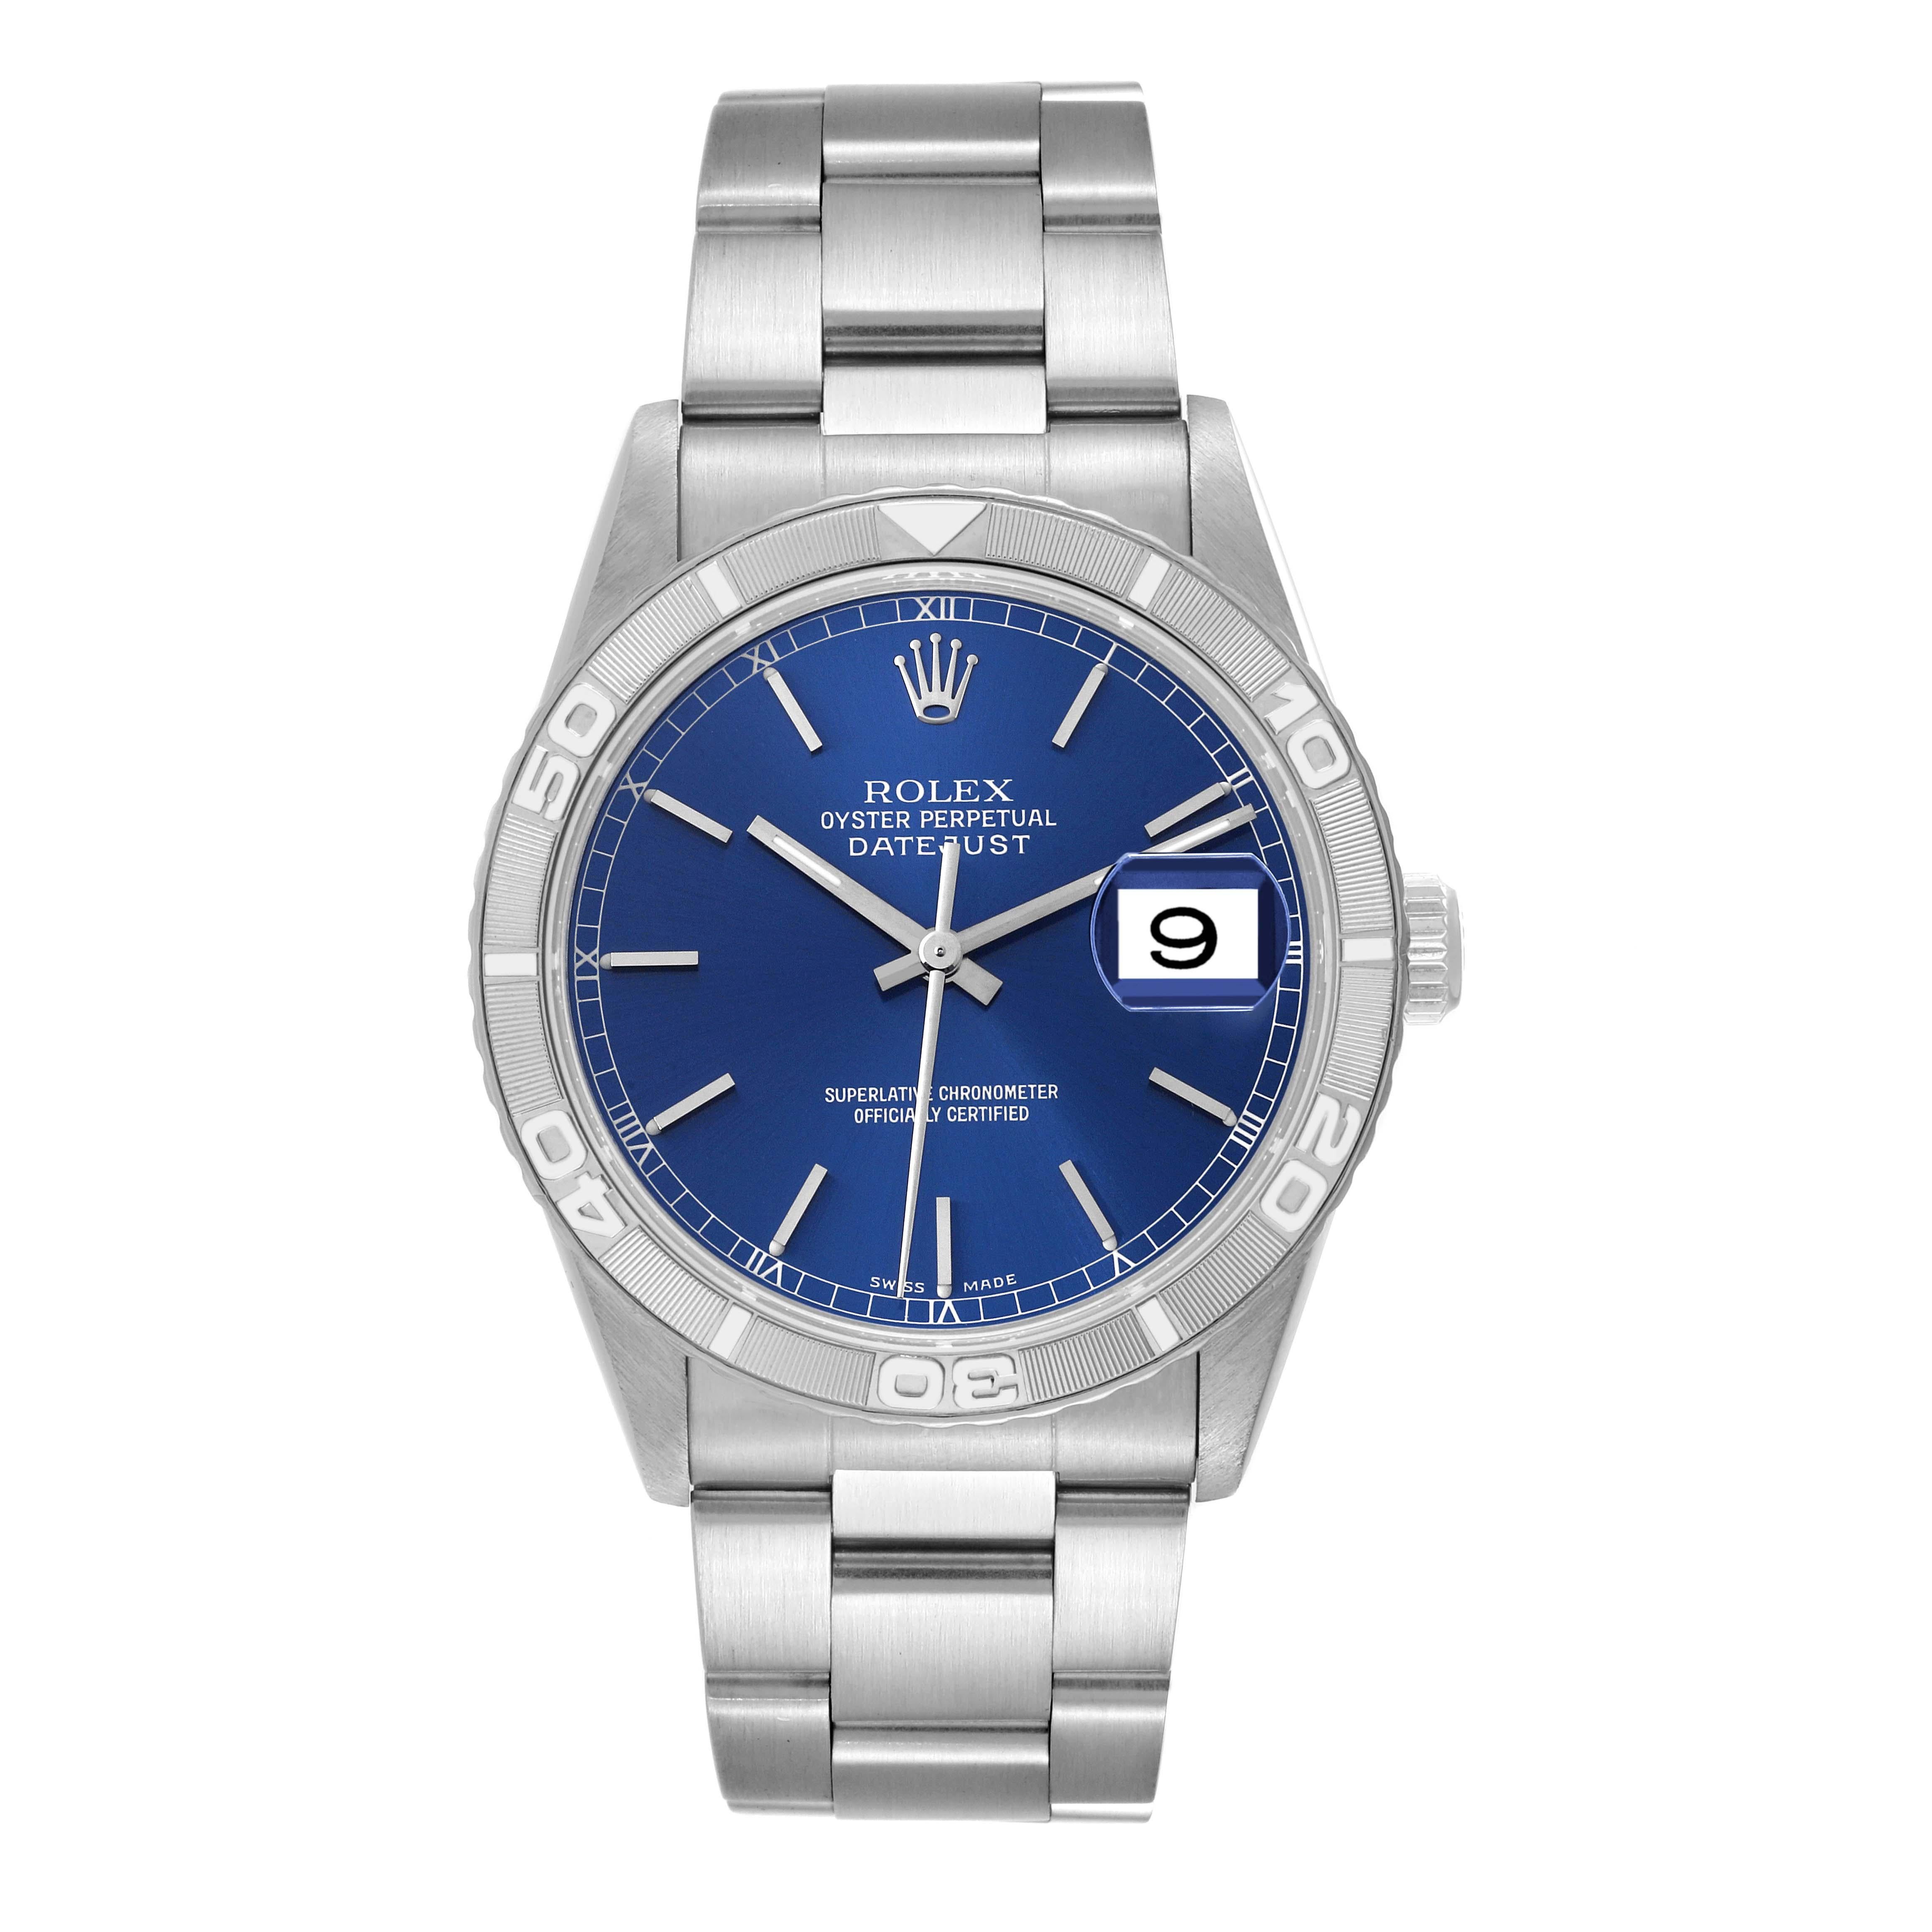 Rolex Datejust Turnograph Steel White Gold Blue Dial Mens Watch 16264. Officially certified chronometer automatic self-winding movement with quickset date function. Stainless steel case 36.0 mm in diameter. Rolex logo on the crown. 18k white gold